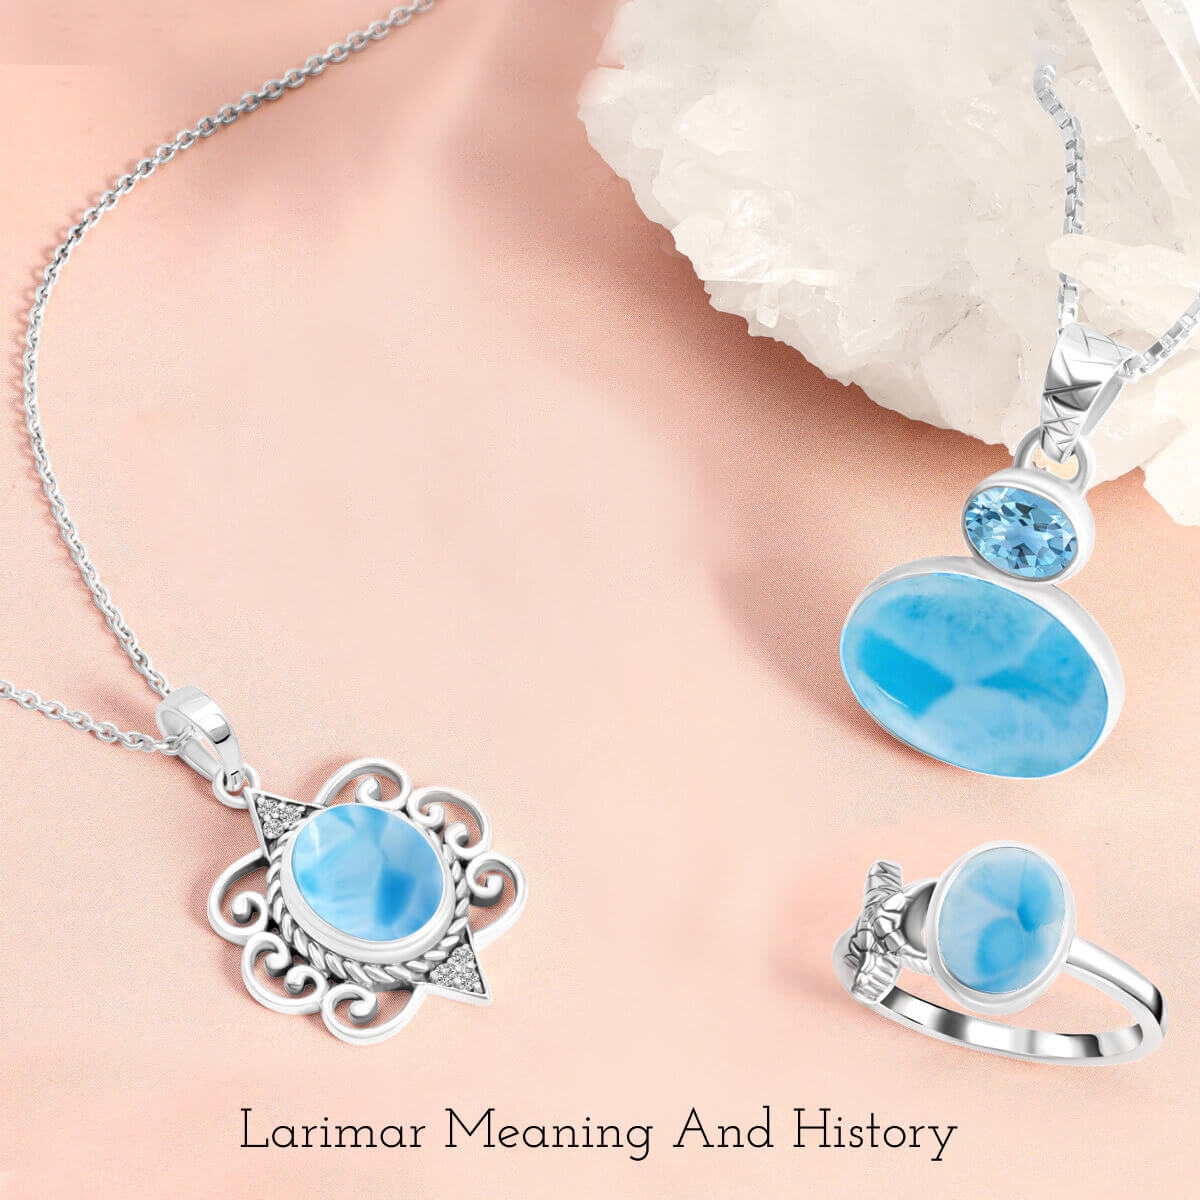 Larimar Meaning And History